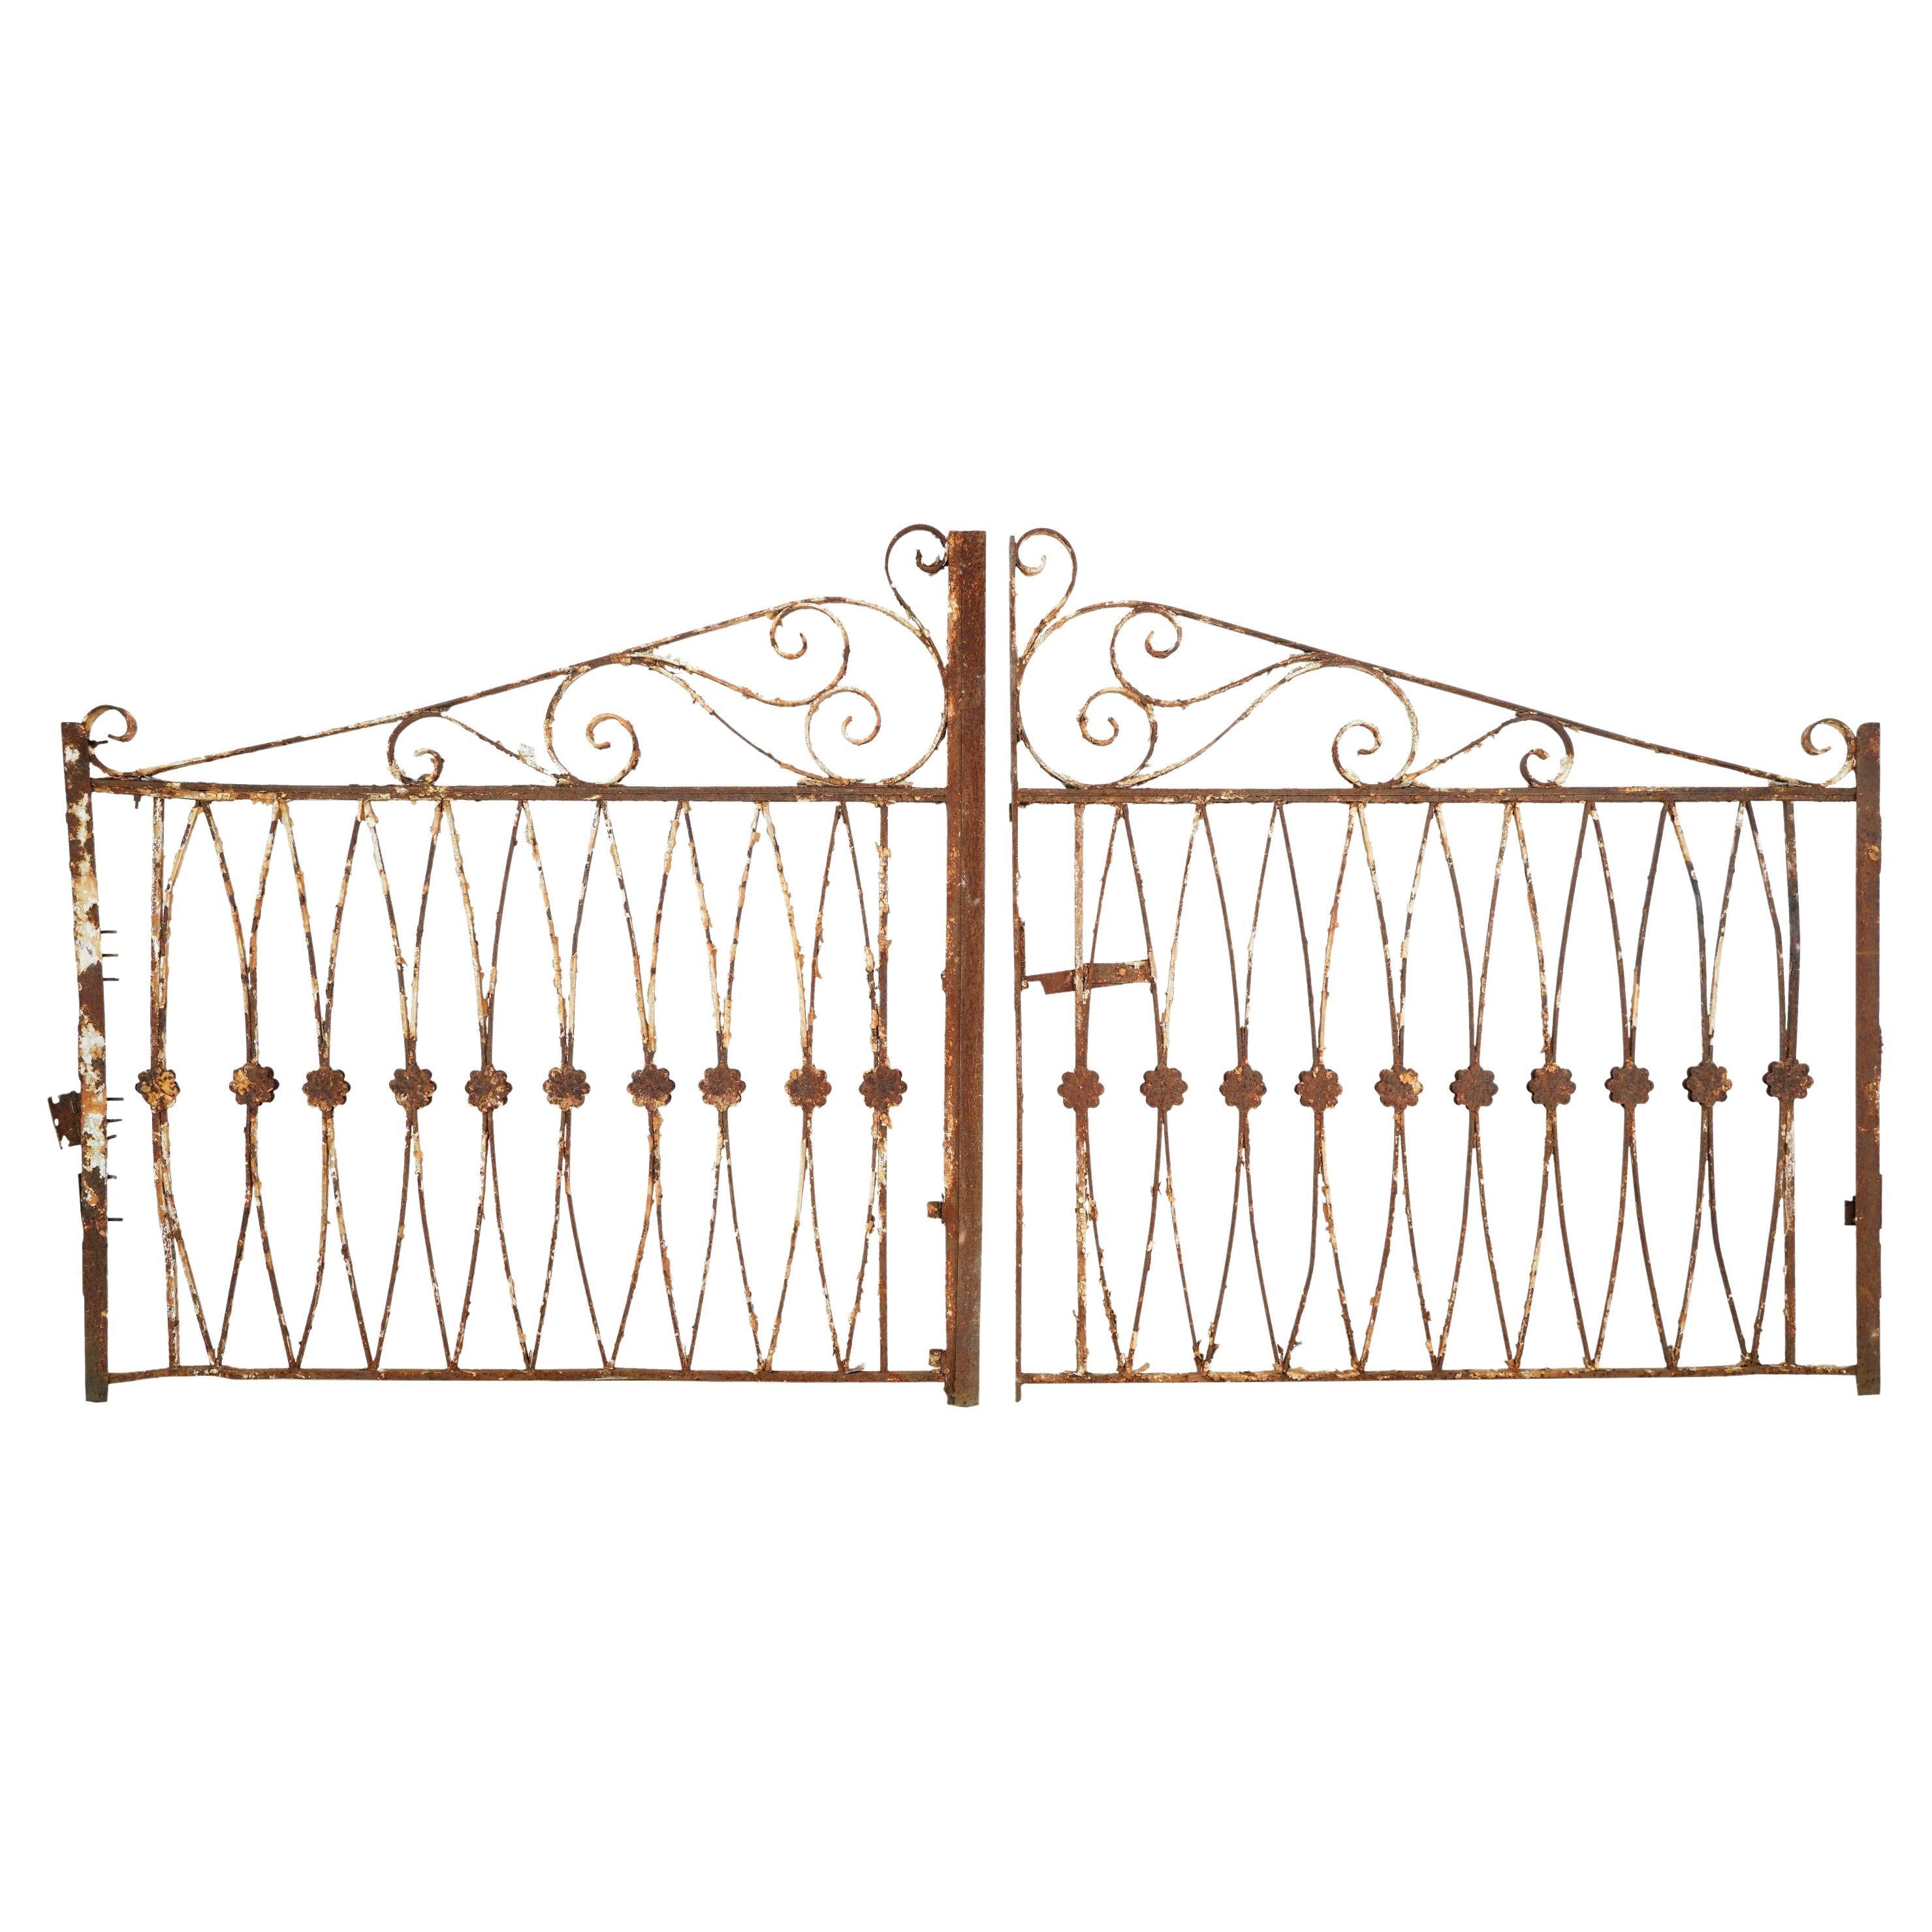 111 in. Ovals & Swirls Wrought Iron Double Driveway Gates For Sale